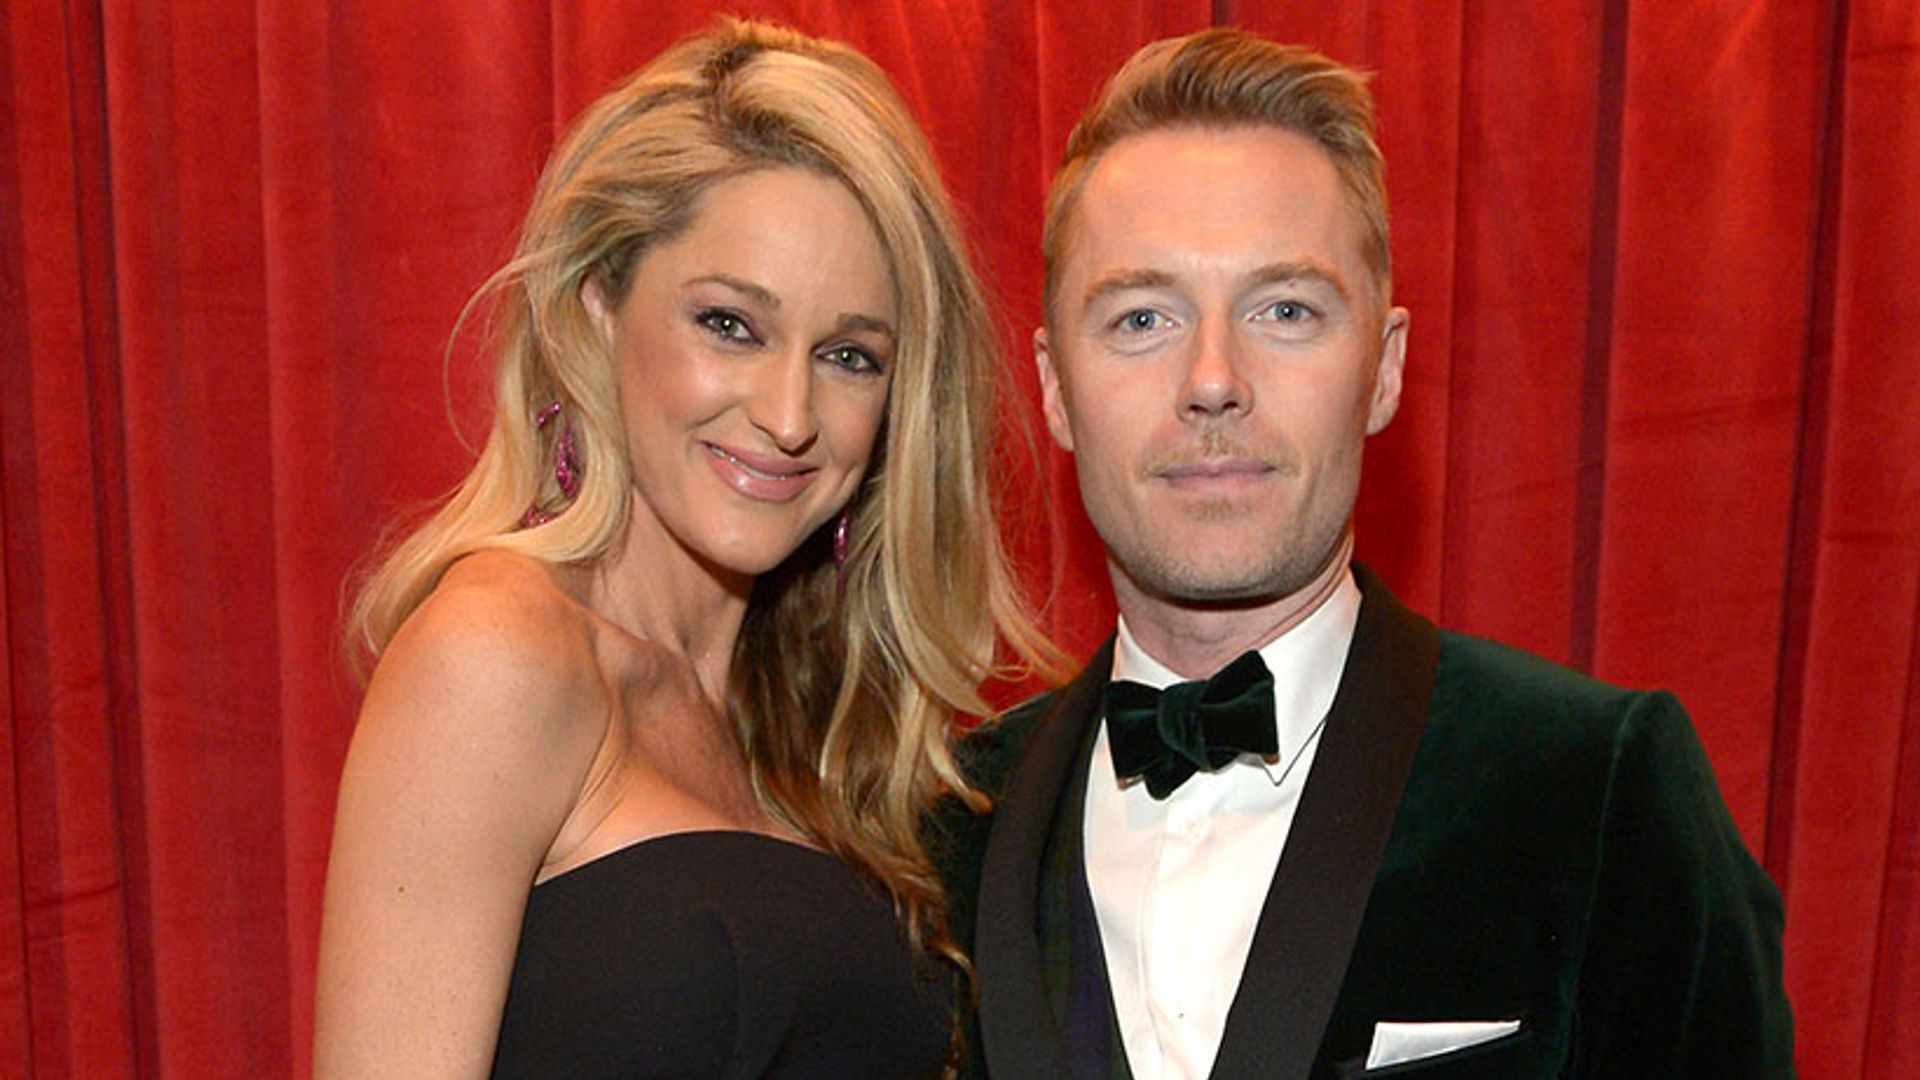 Ronan Keating's wife Storm opens up about baby joy as the singer celebrates his 40th birthday